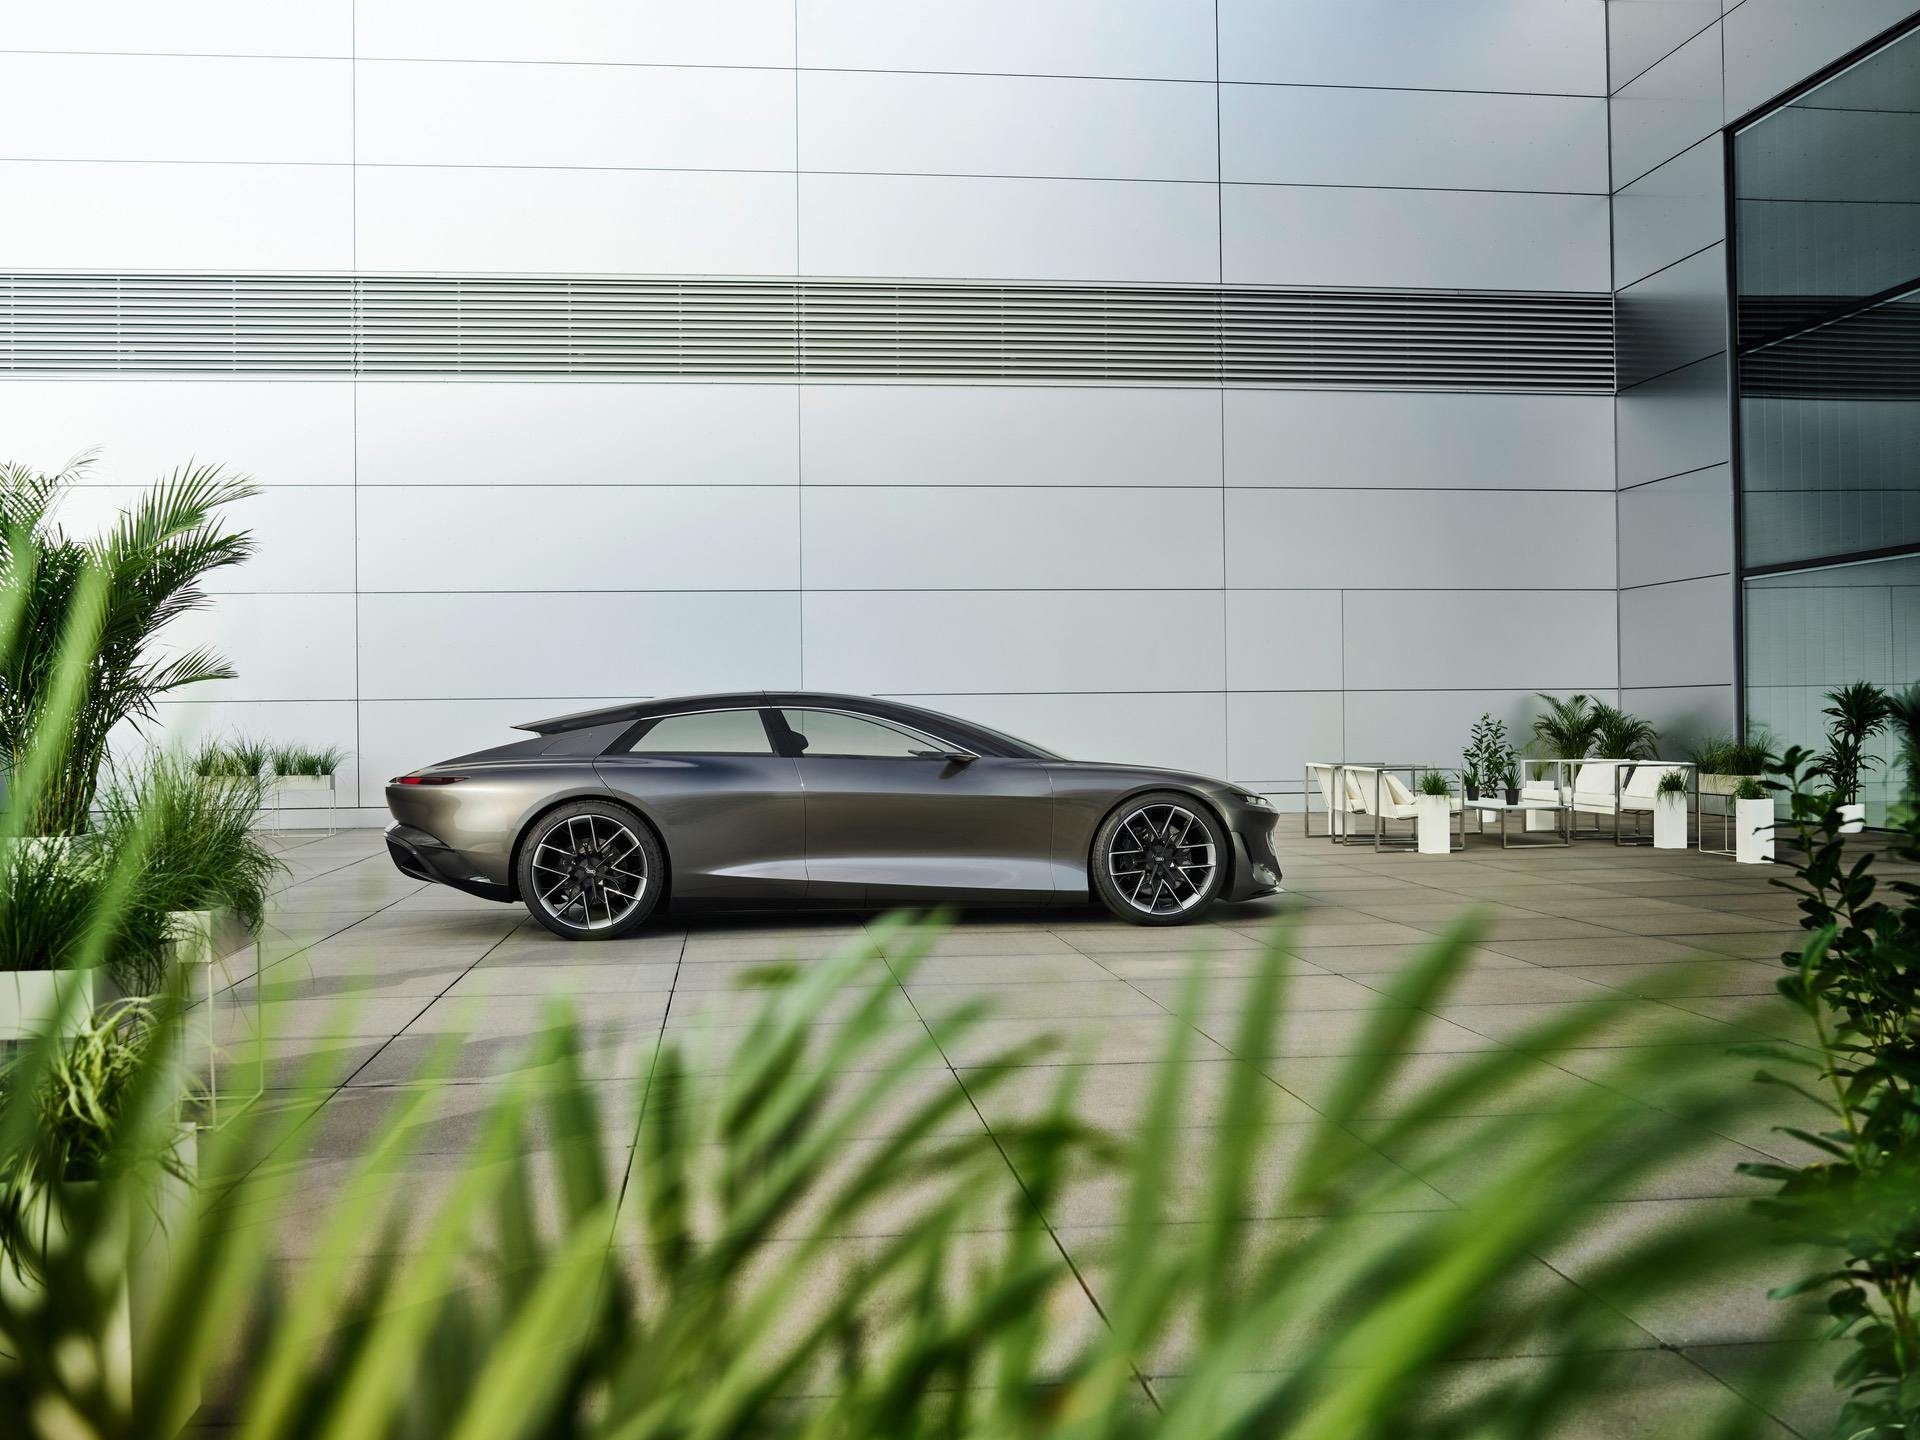 VIDEO: Get A Closer Look At The All New Audi Grand Sphere